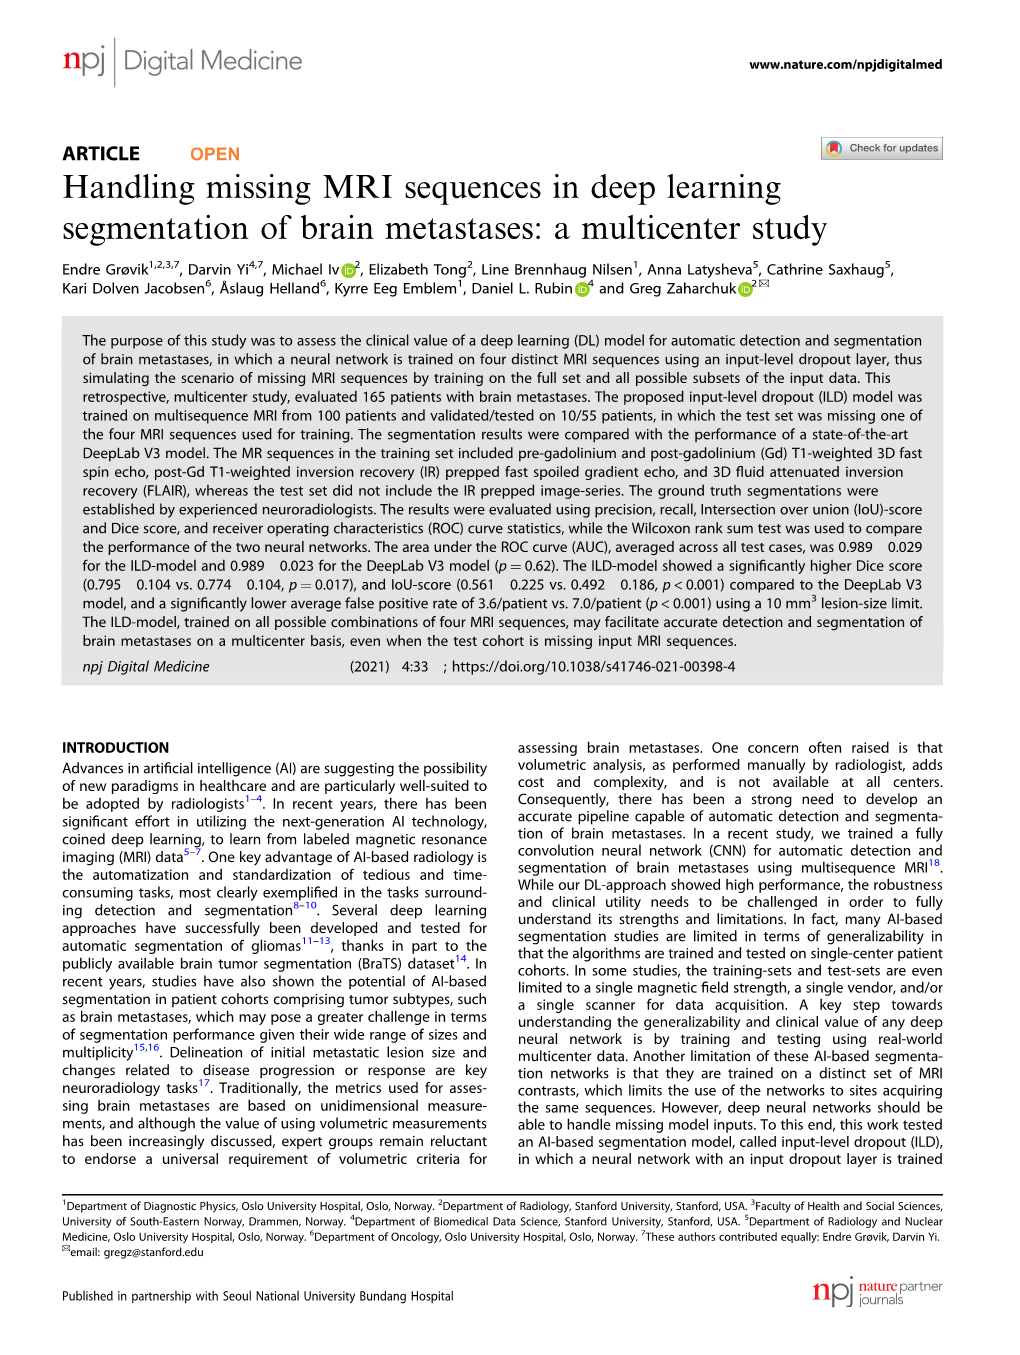 Handling Missing MRI Sequences in Deep Learning Segmentation of Brain Metastases: a Multicenter Study